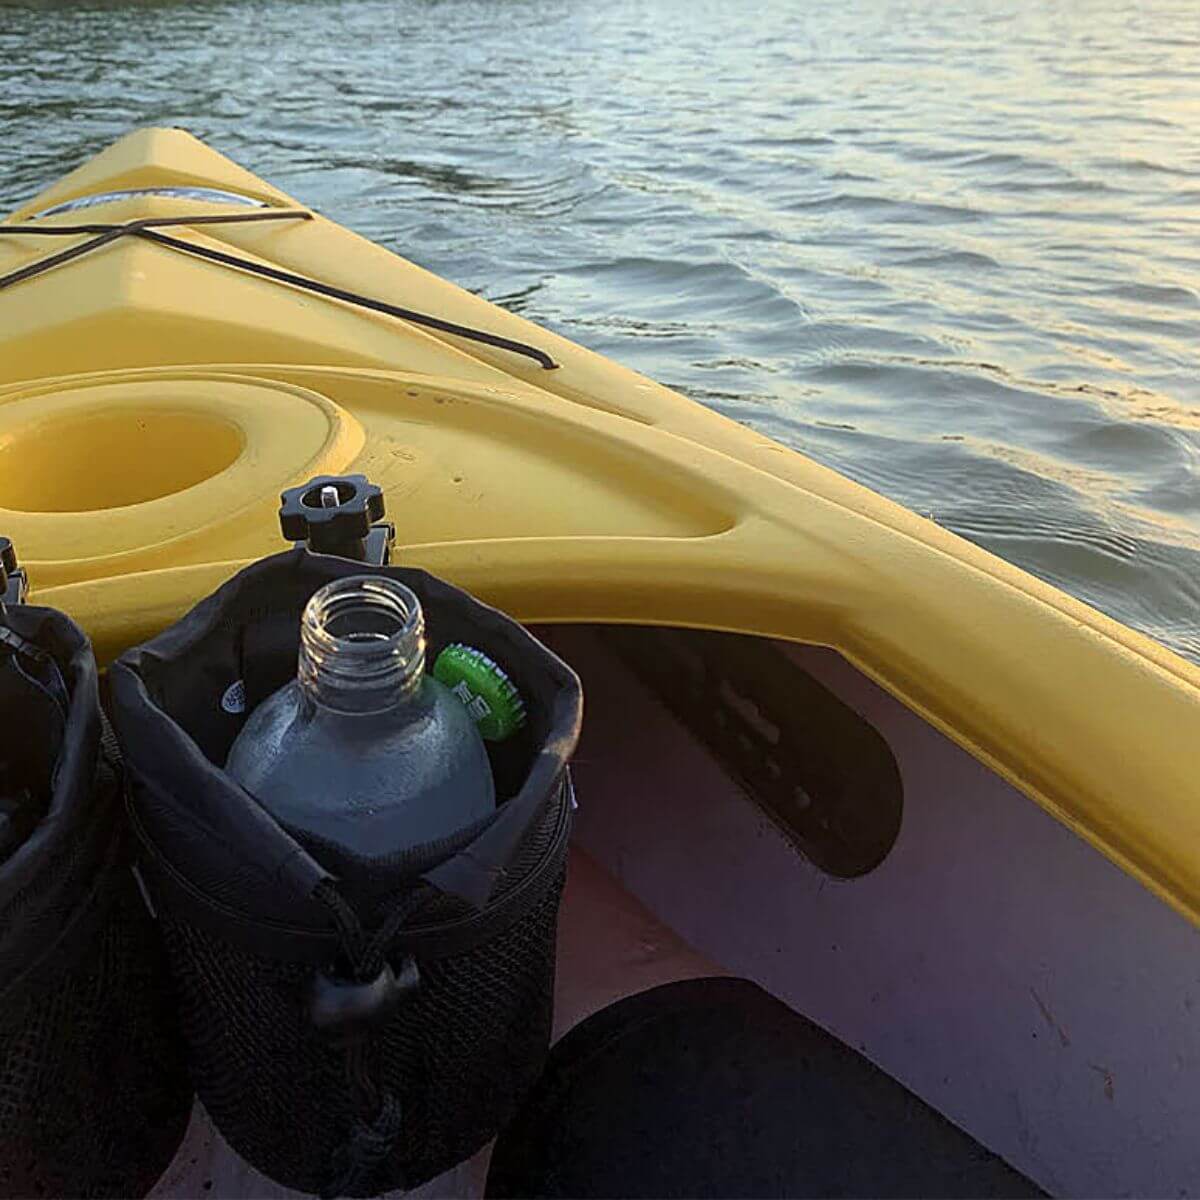 Tired of Knocking Your Drink Over? Check Out Our Picks for the Top Kayak Cup Holders!